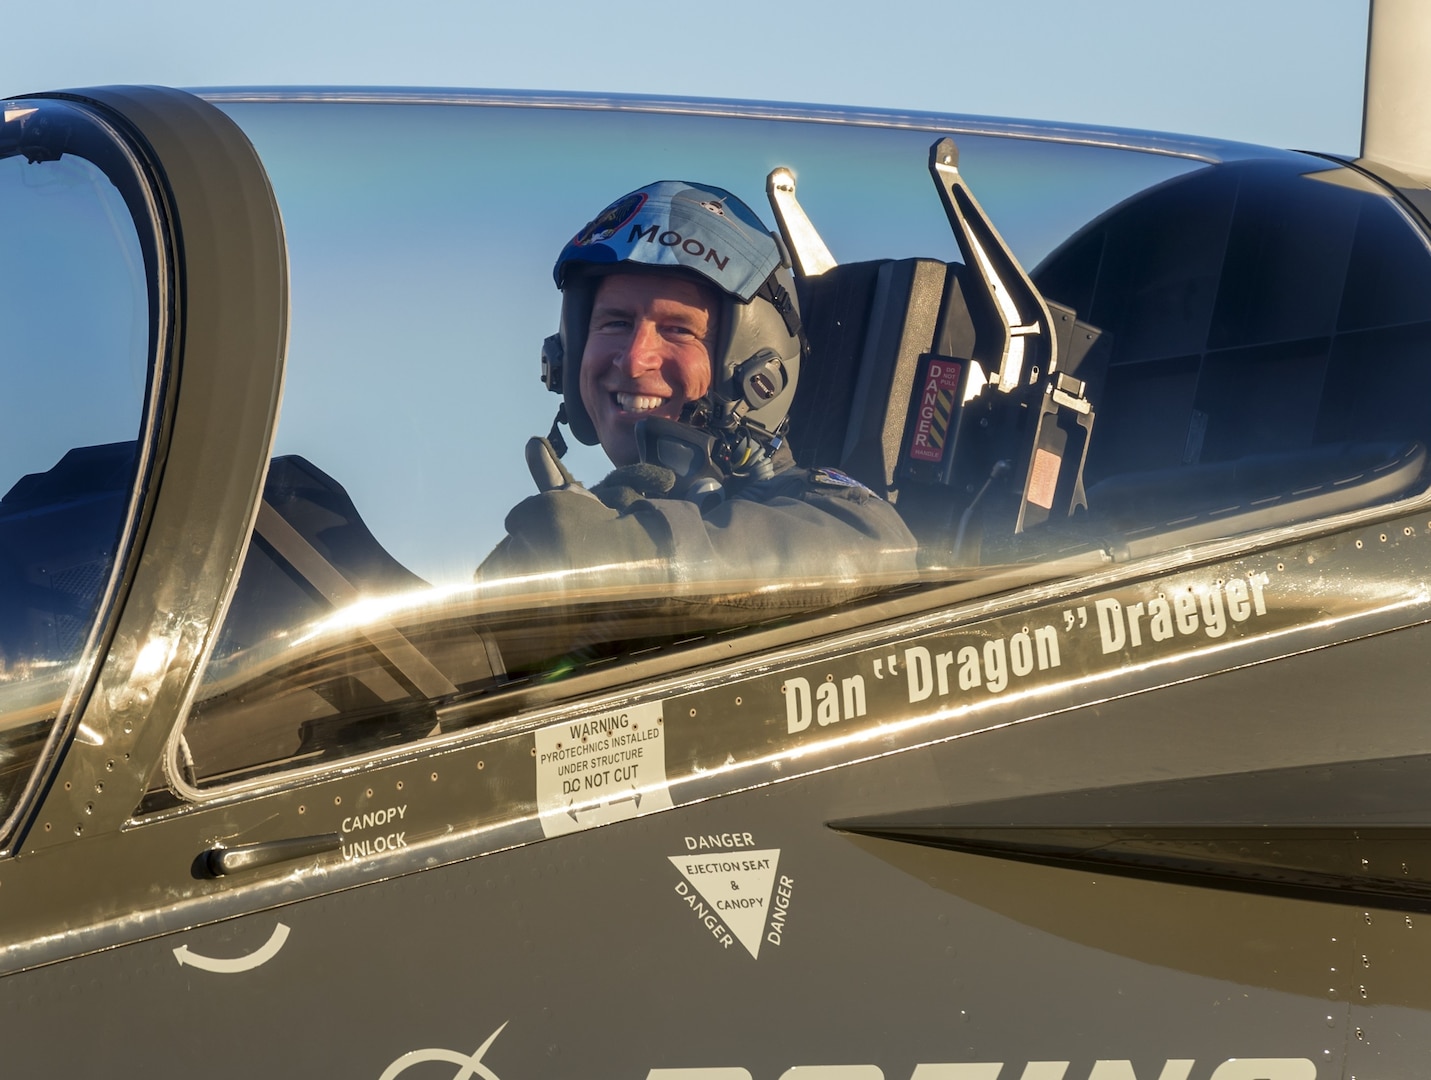 Maj. Gen. Patrick Doherty, 19th Air Force commander, gets ready for a T-X familiarization sortie at the Boeing facility in St. Louis, Nov. 27, 2018. The T-X trainer will help the service increase the lethality and readiness of future pilots in both under- and graduate-level training courses due to its advanced training capabilities.